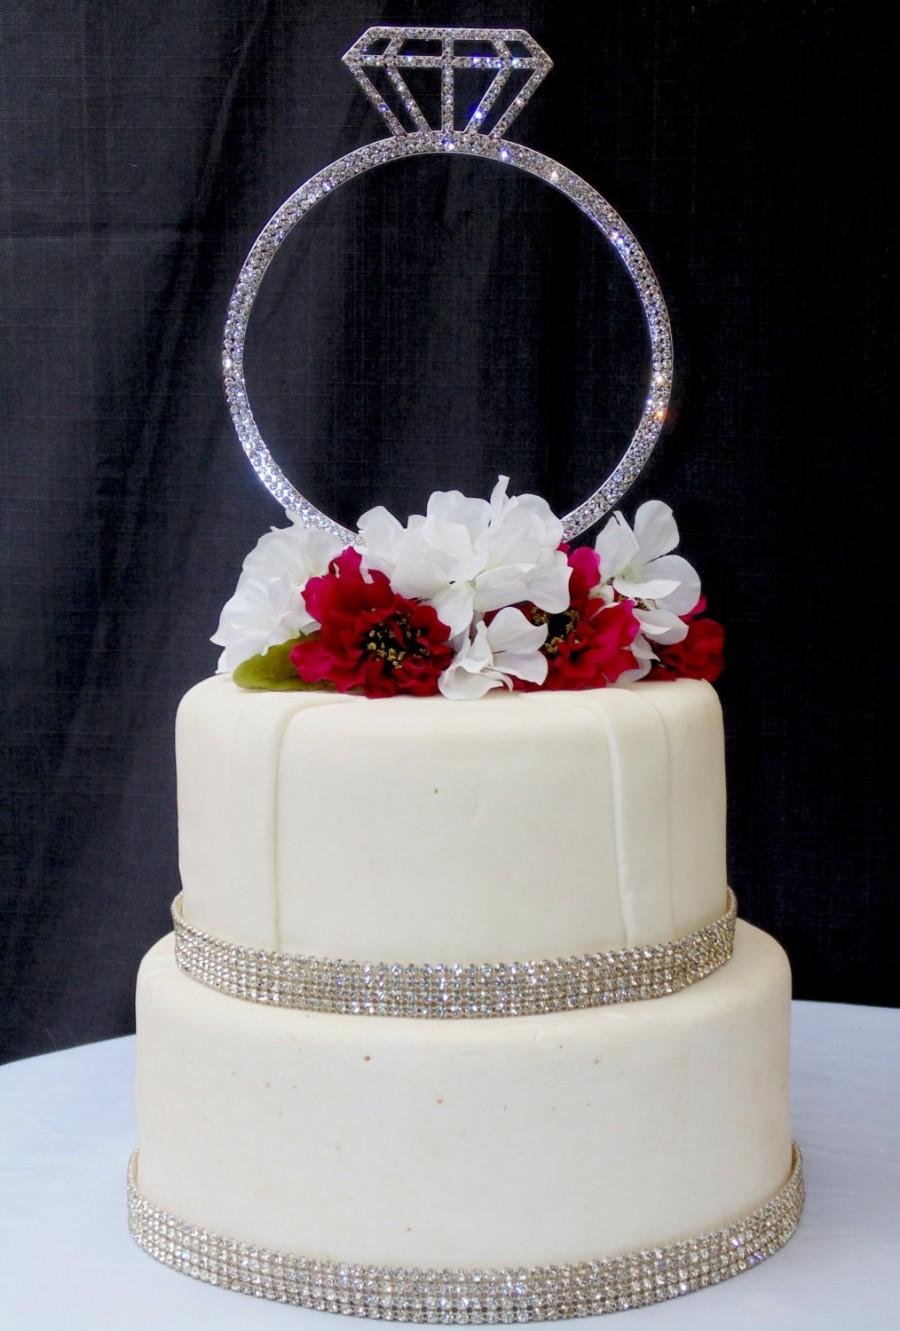 Mariage - Single Extravagant Large Silver Rhinestone Wedding Ring Cake Topper by Forbes Favors